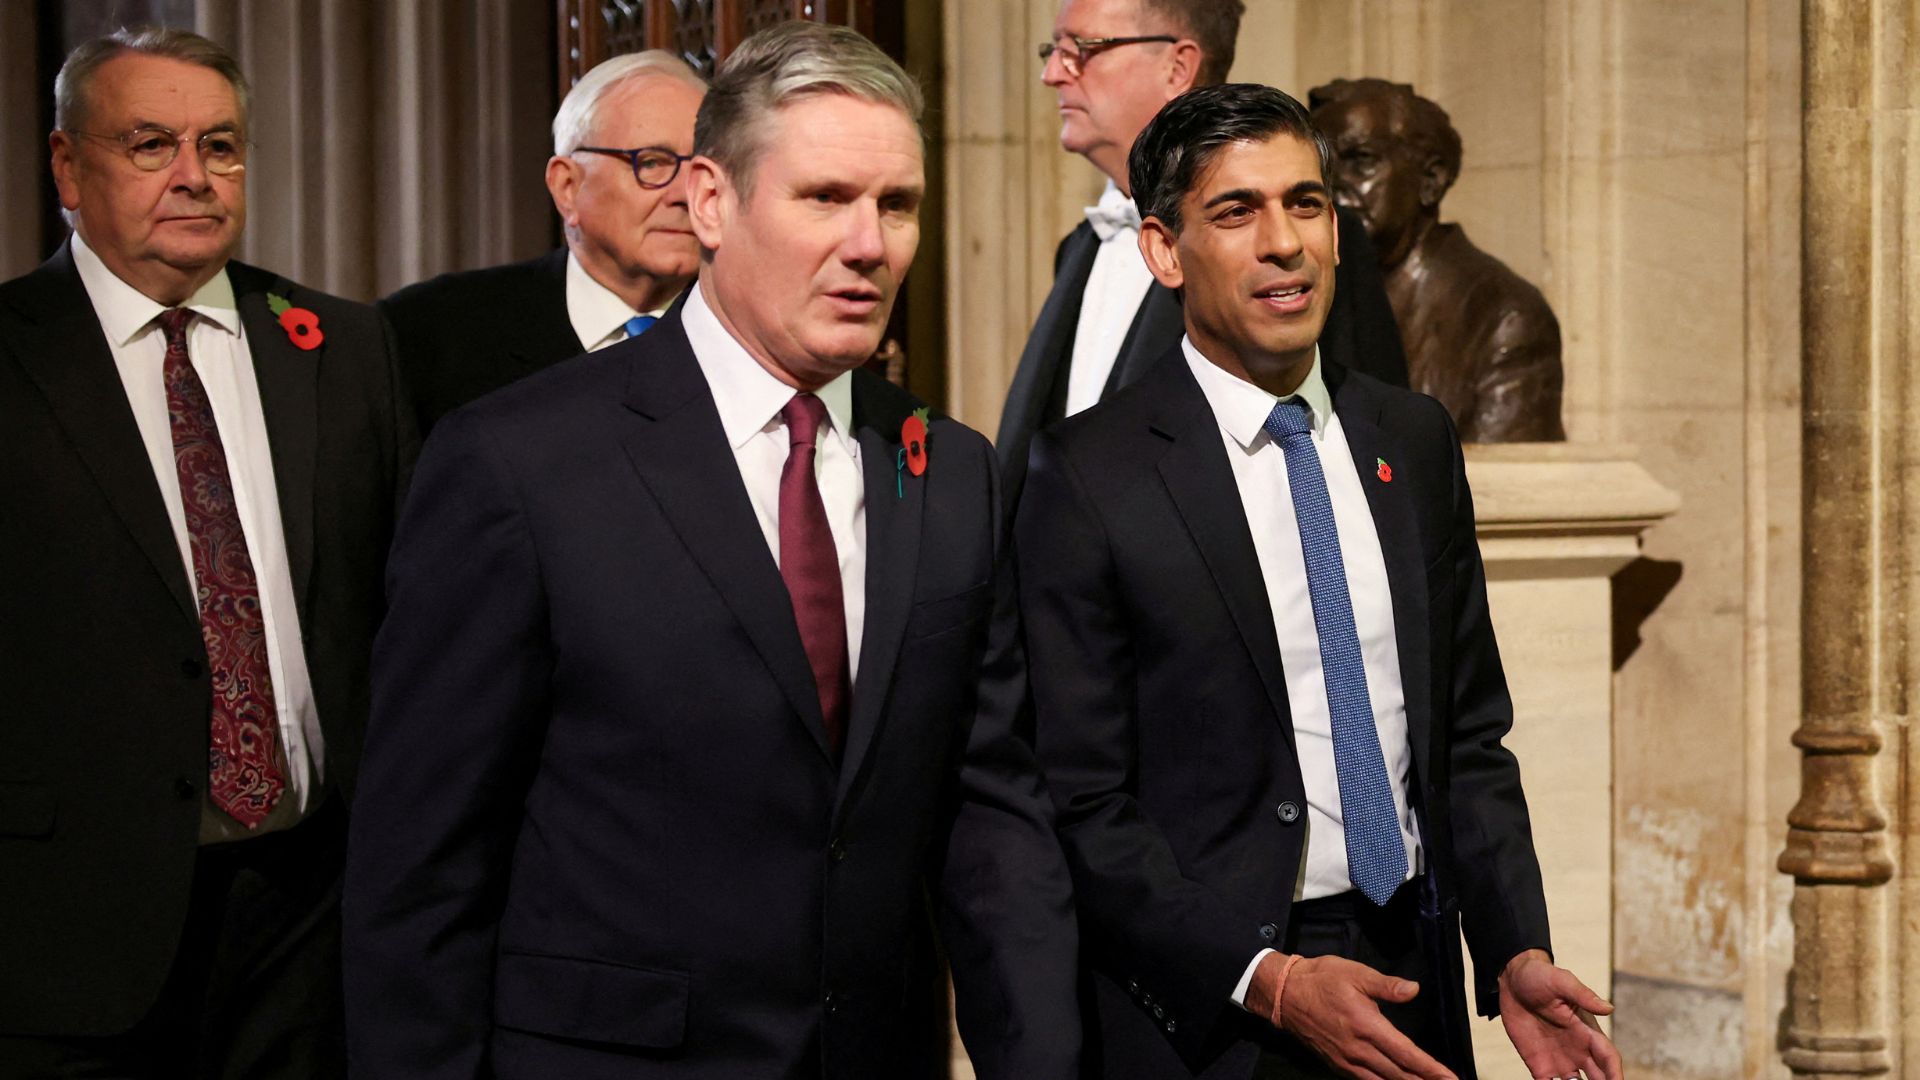 Labour Party leader Sir Keir Starmer walks with Britain's Prime Minister Rishi Sunak during the State Opening of Parliament ceremony last November. /Hannah McKay/Pool/File